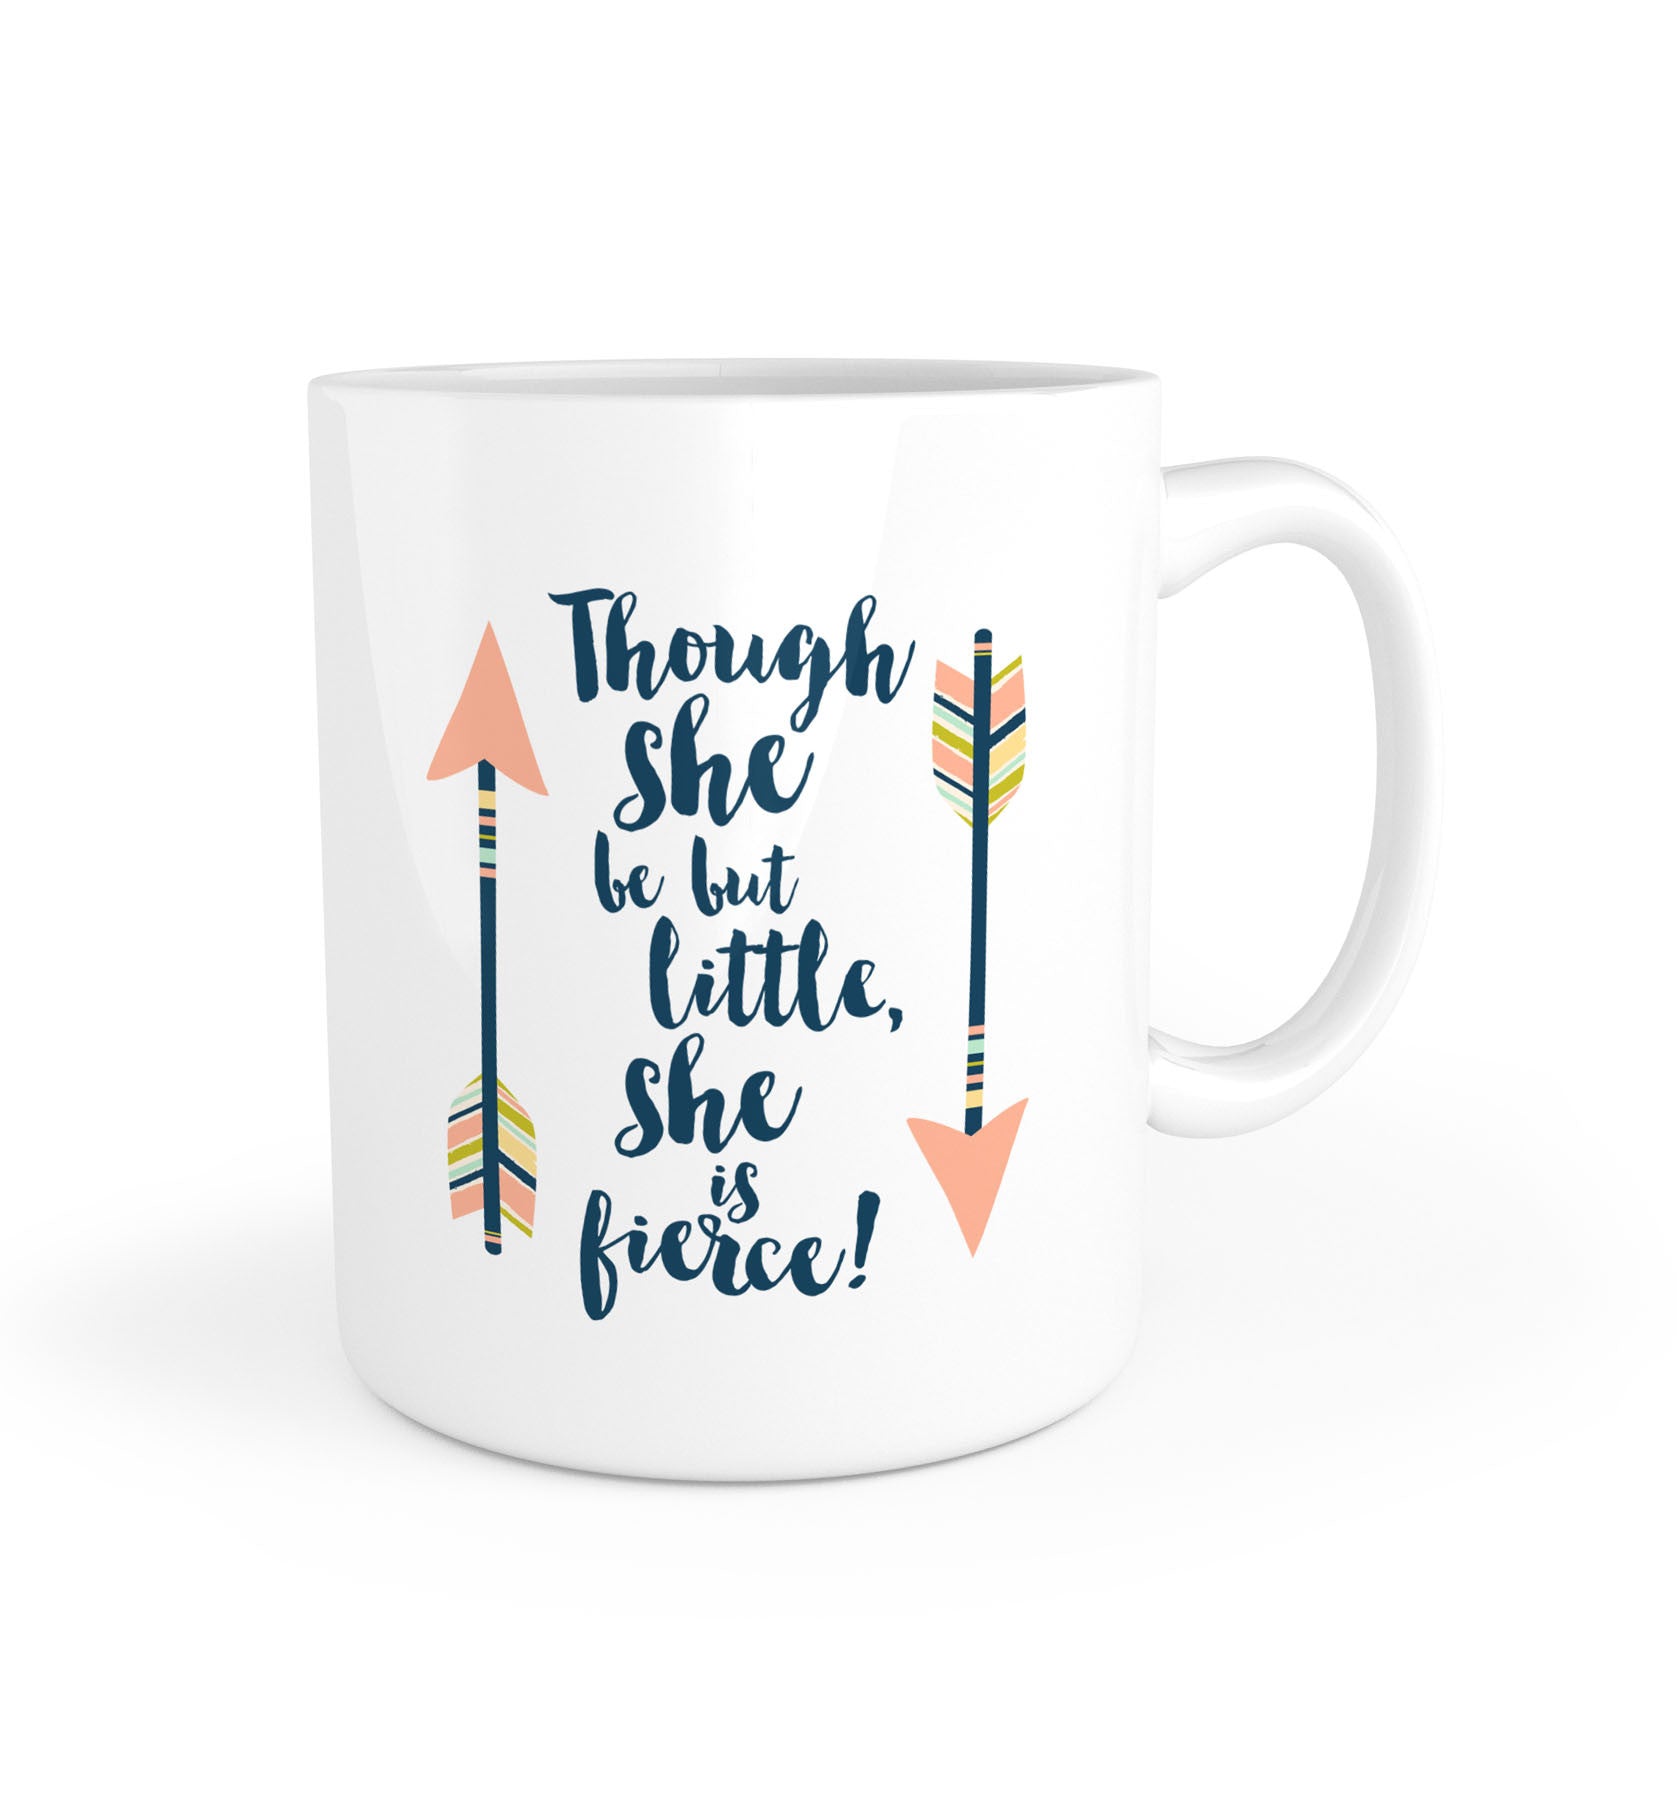 Though she be but little... A Midsummer Night's Dream Mug - Literary Lifestyle Company